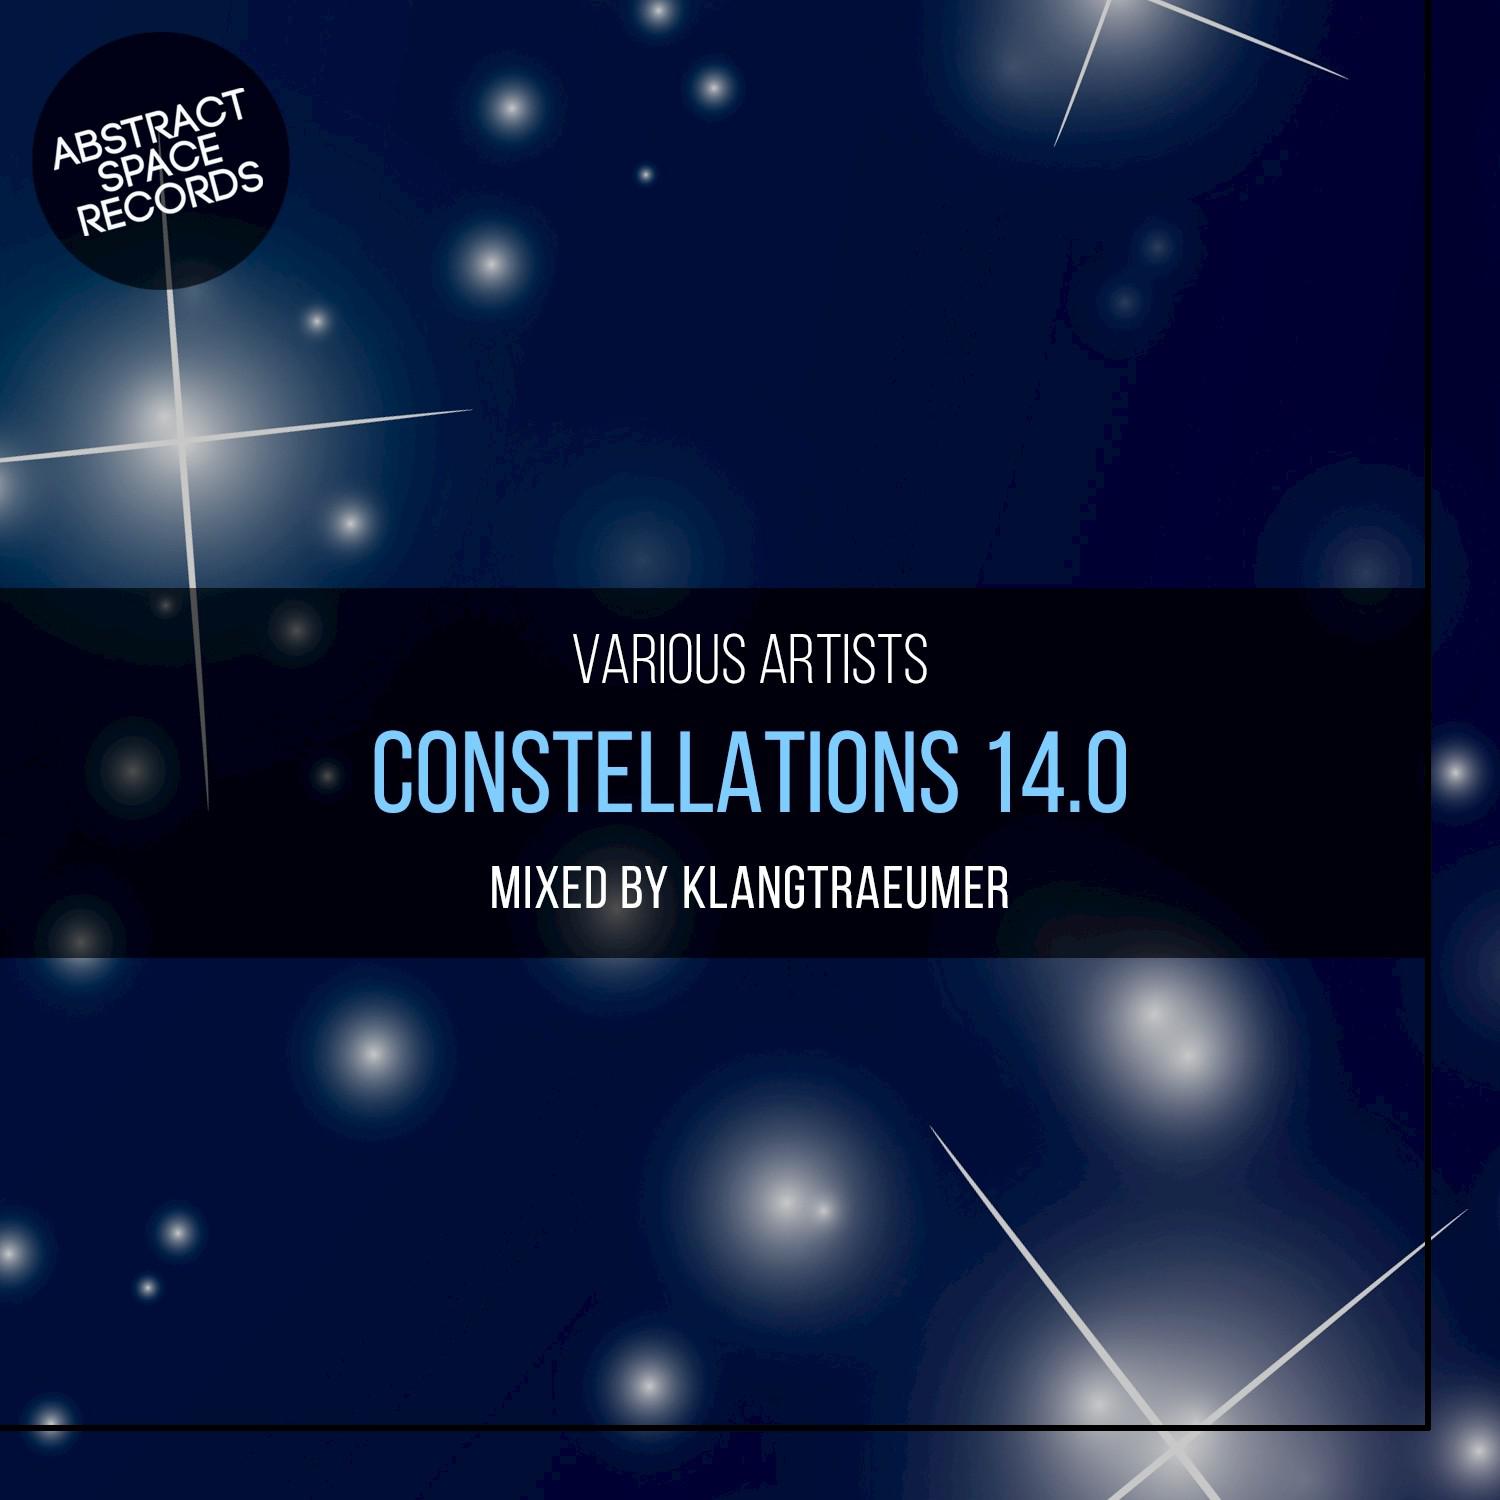 Constellations 14.0 (Compiled and Mixed by Klangtraeumer)